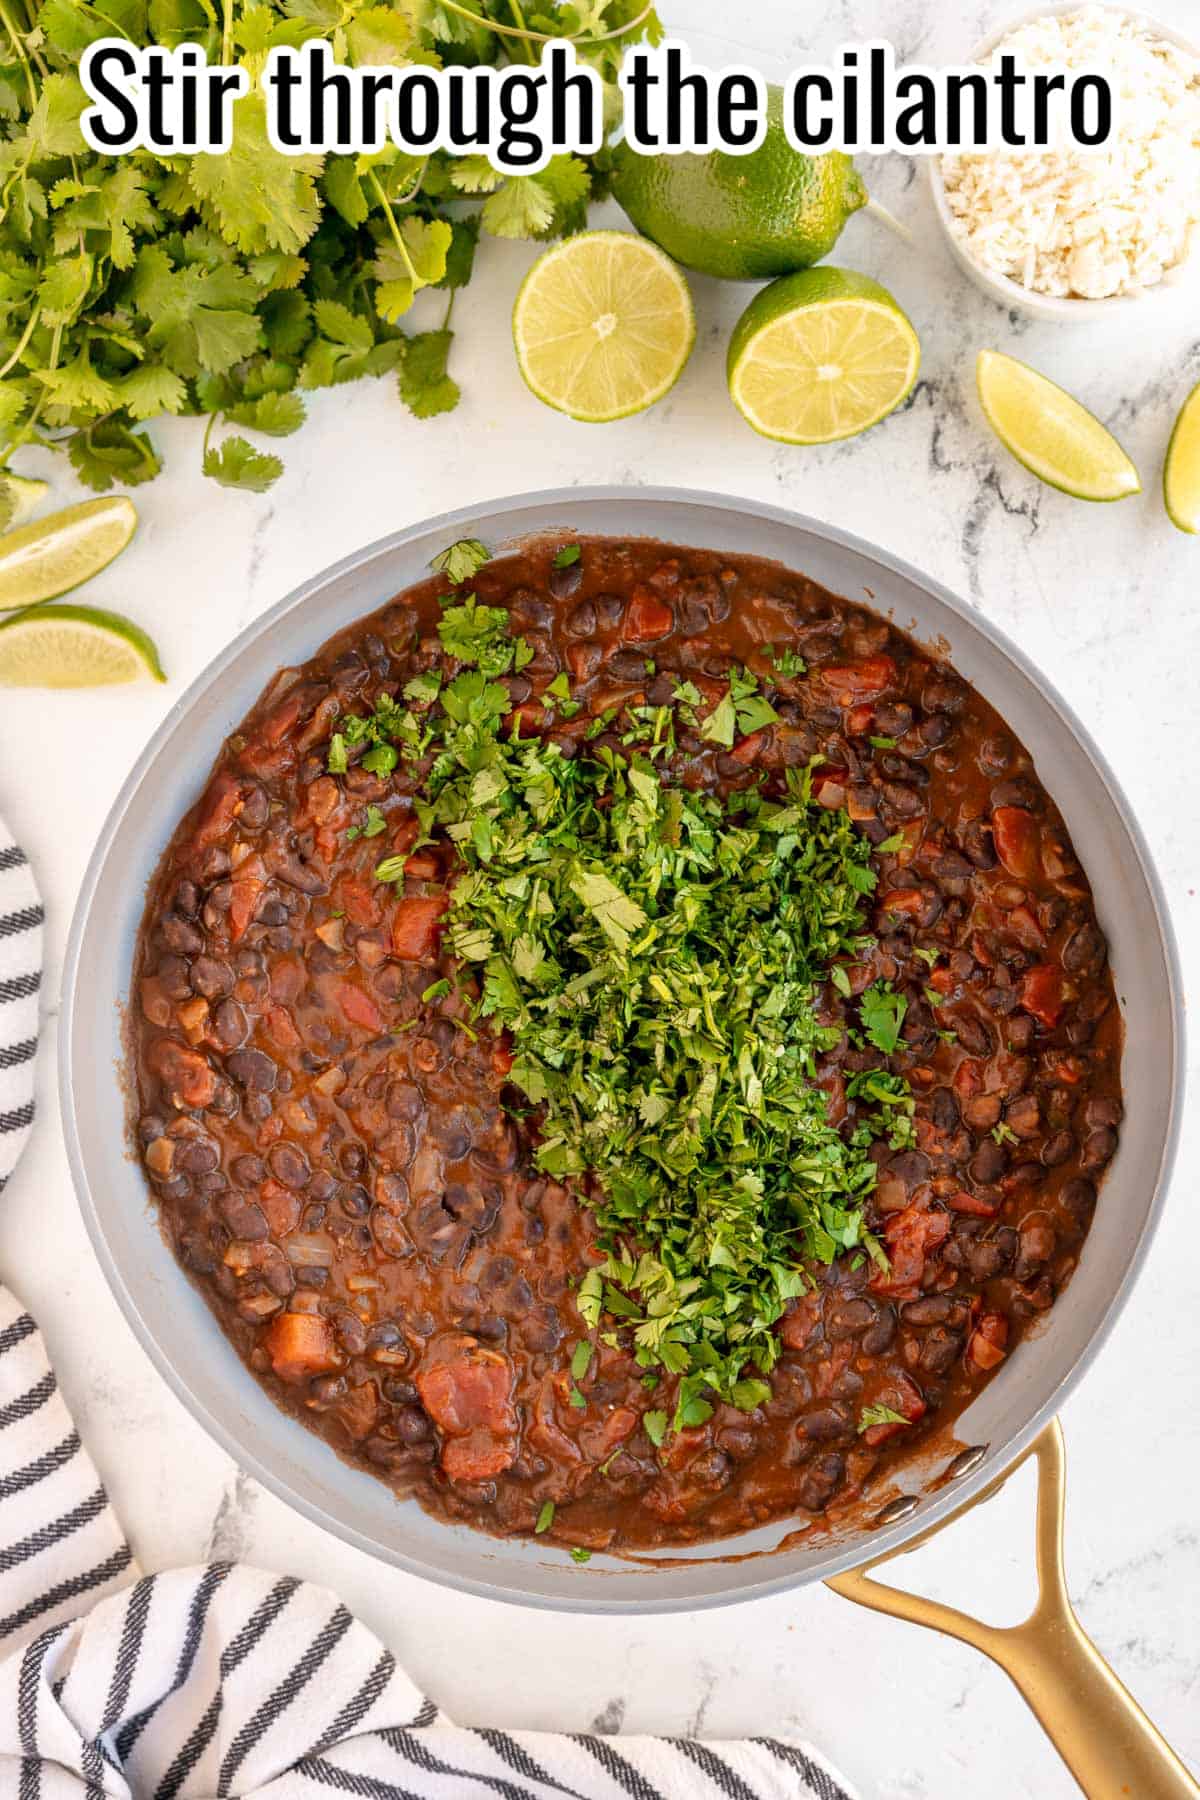 Skillet with black beans and text "stir through the cilantro".